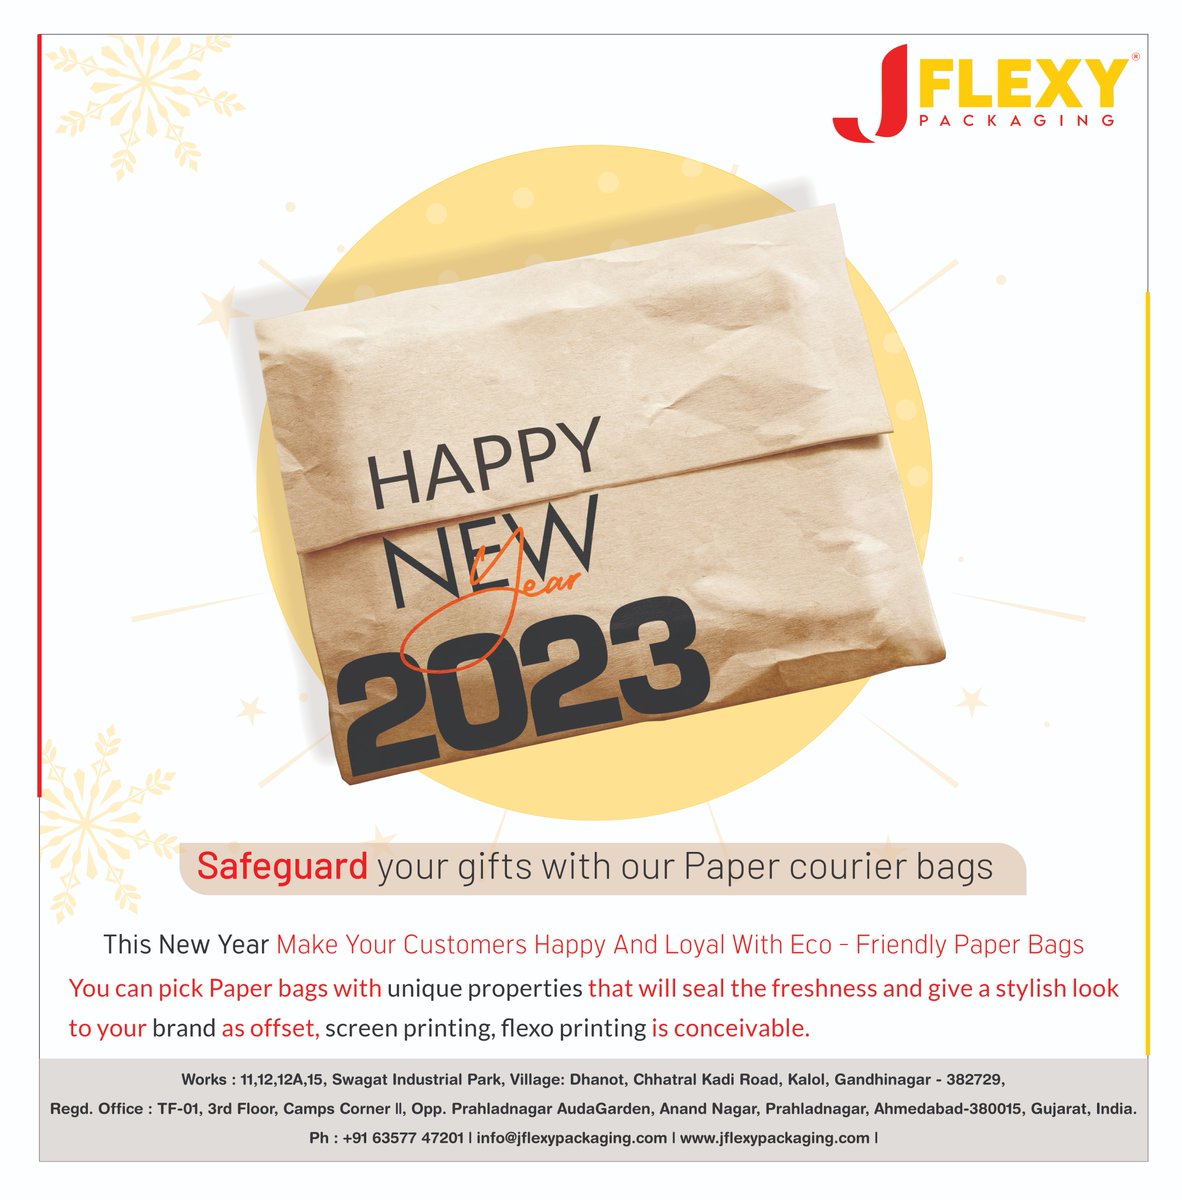 ( 2023 )This New Year Make Your Customers Happy And Loyal With Our Eco - Friendly Paper Bags
#jflexypackaging #packagingdesign #deliverybag #courierbags #packagingproducts #madeinindia #customizebag #manufacturer #packagingideas #ecommerce #businessideas #deliveryworldwide #paper